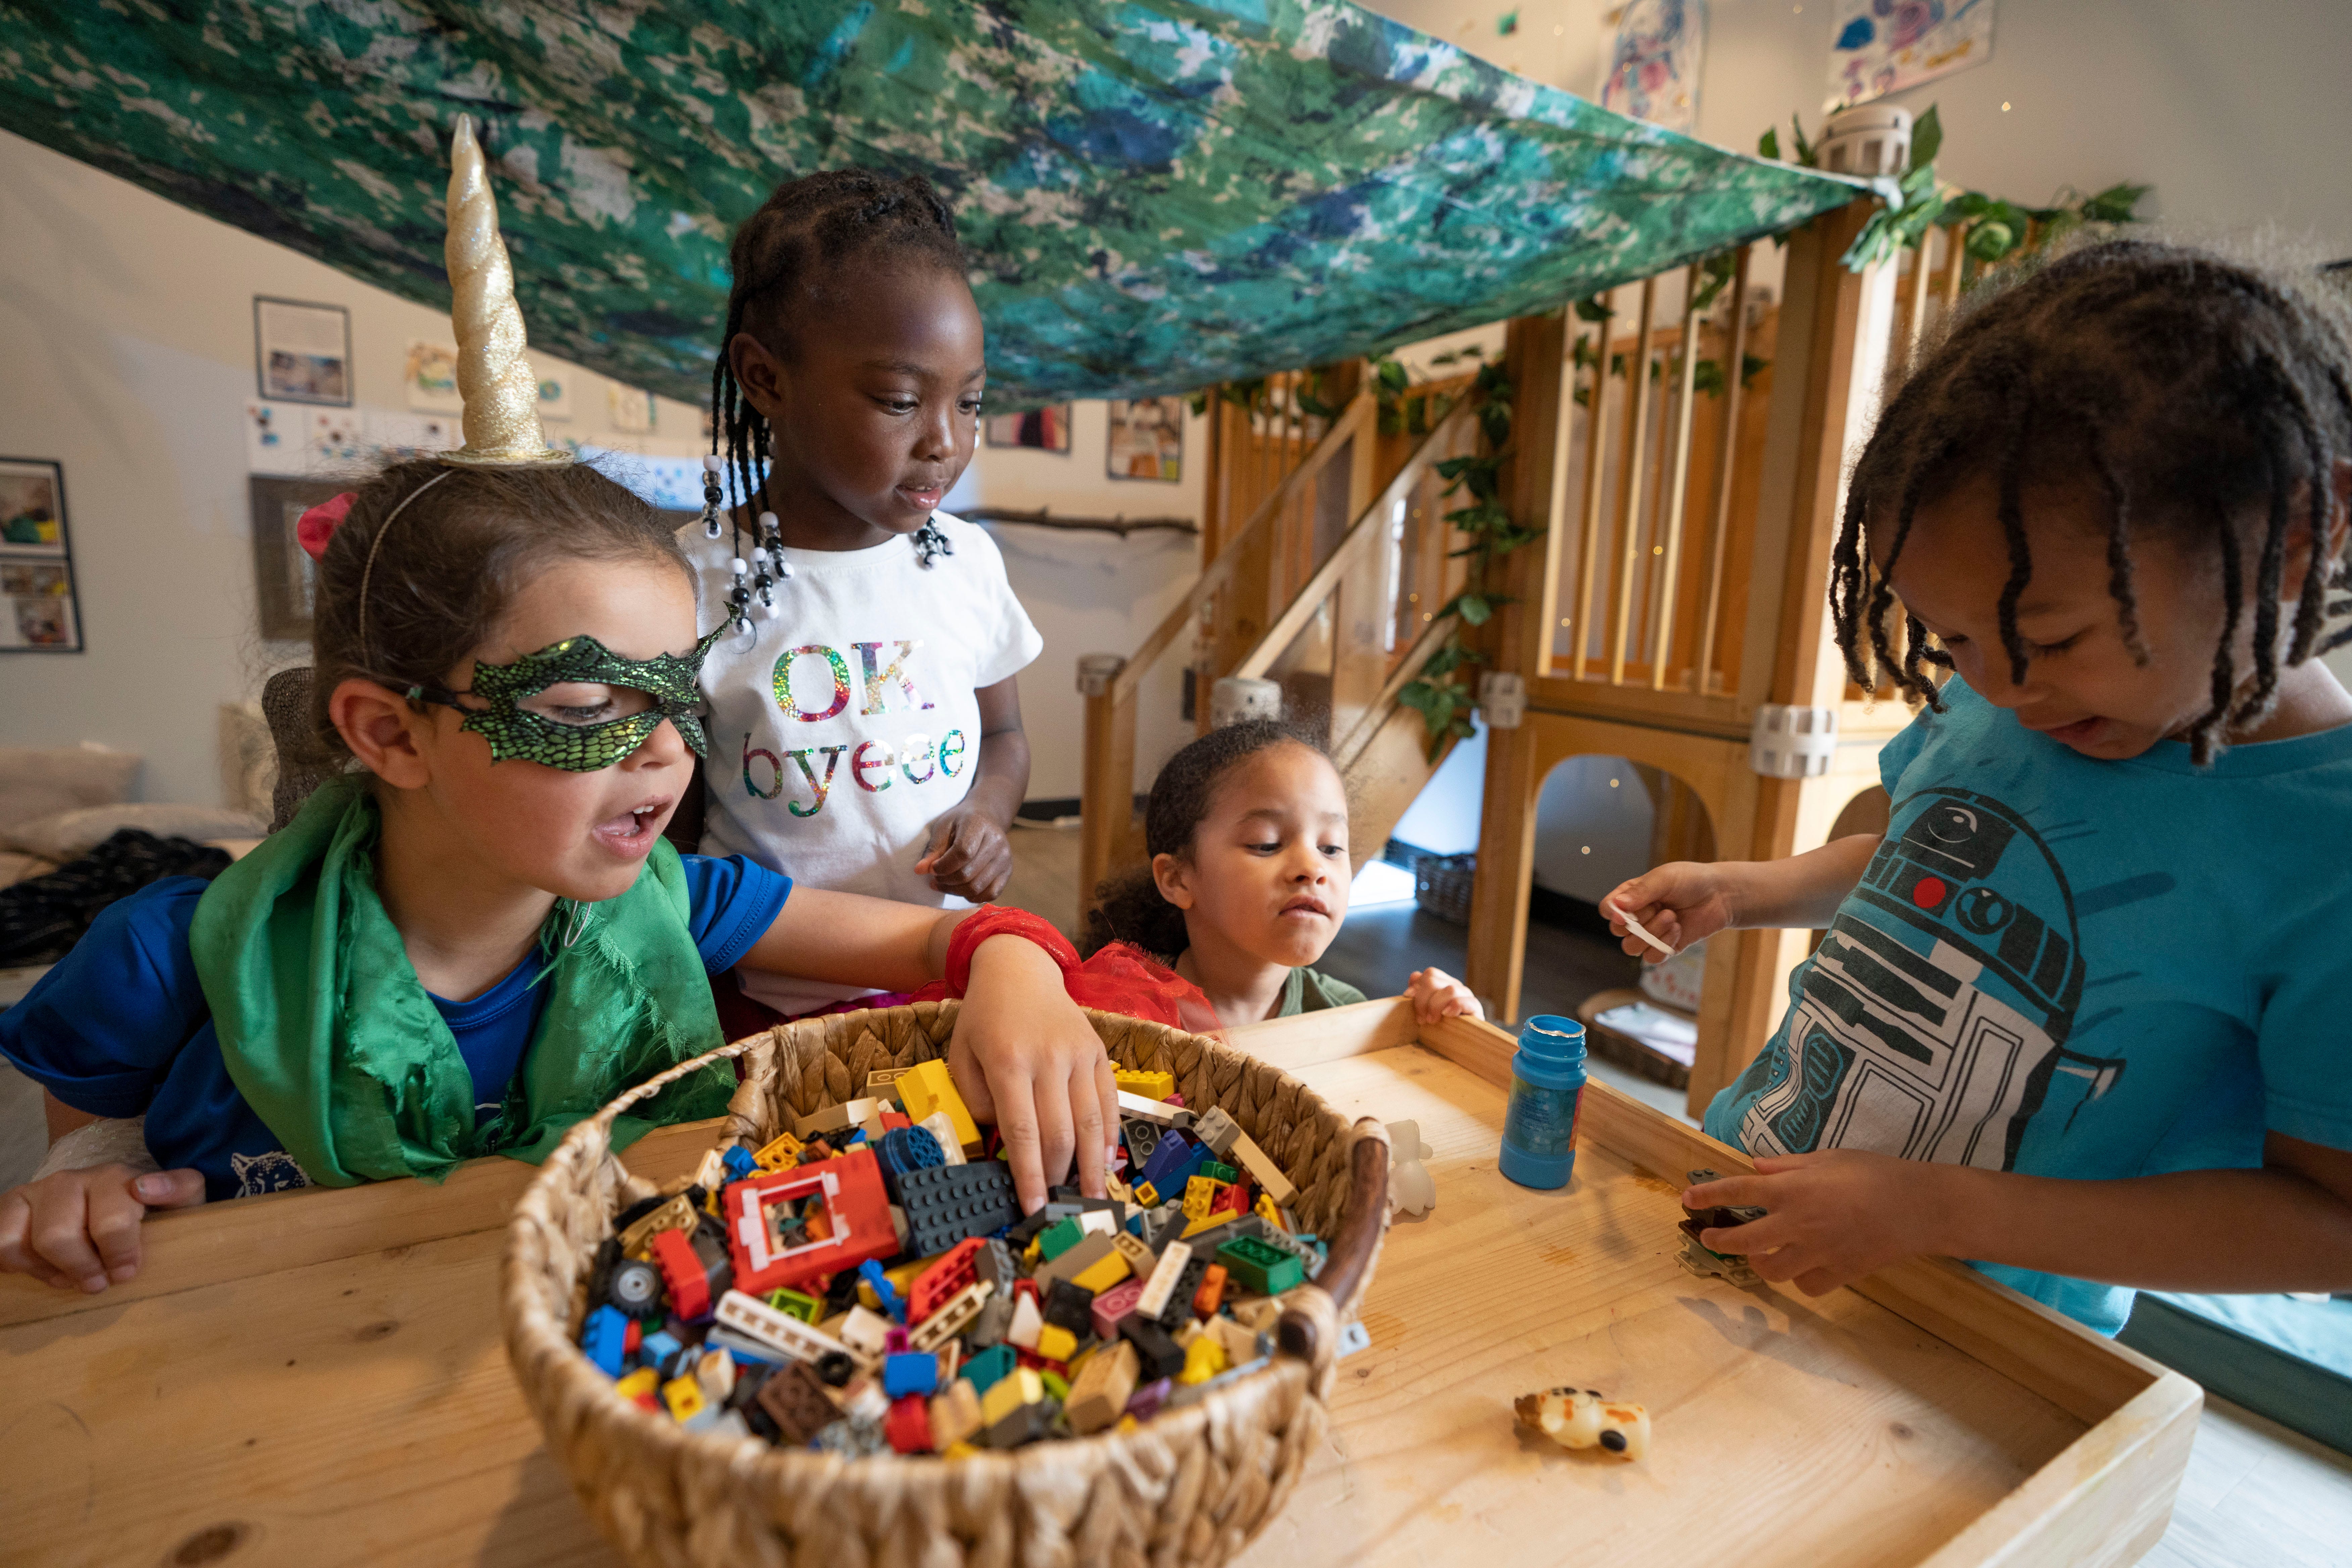 Elena Barragan, Riley Smith, Joshura Davis and Jayceon Bouchillion, all 5, play together at the Urban Sprouts Child Development Center in University City, Mo., on March 29. The center has a waiting list of more than 450 students.